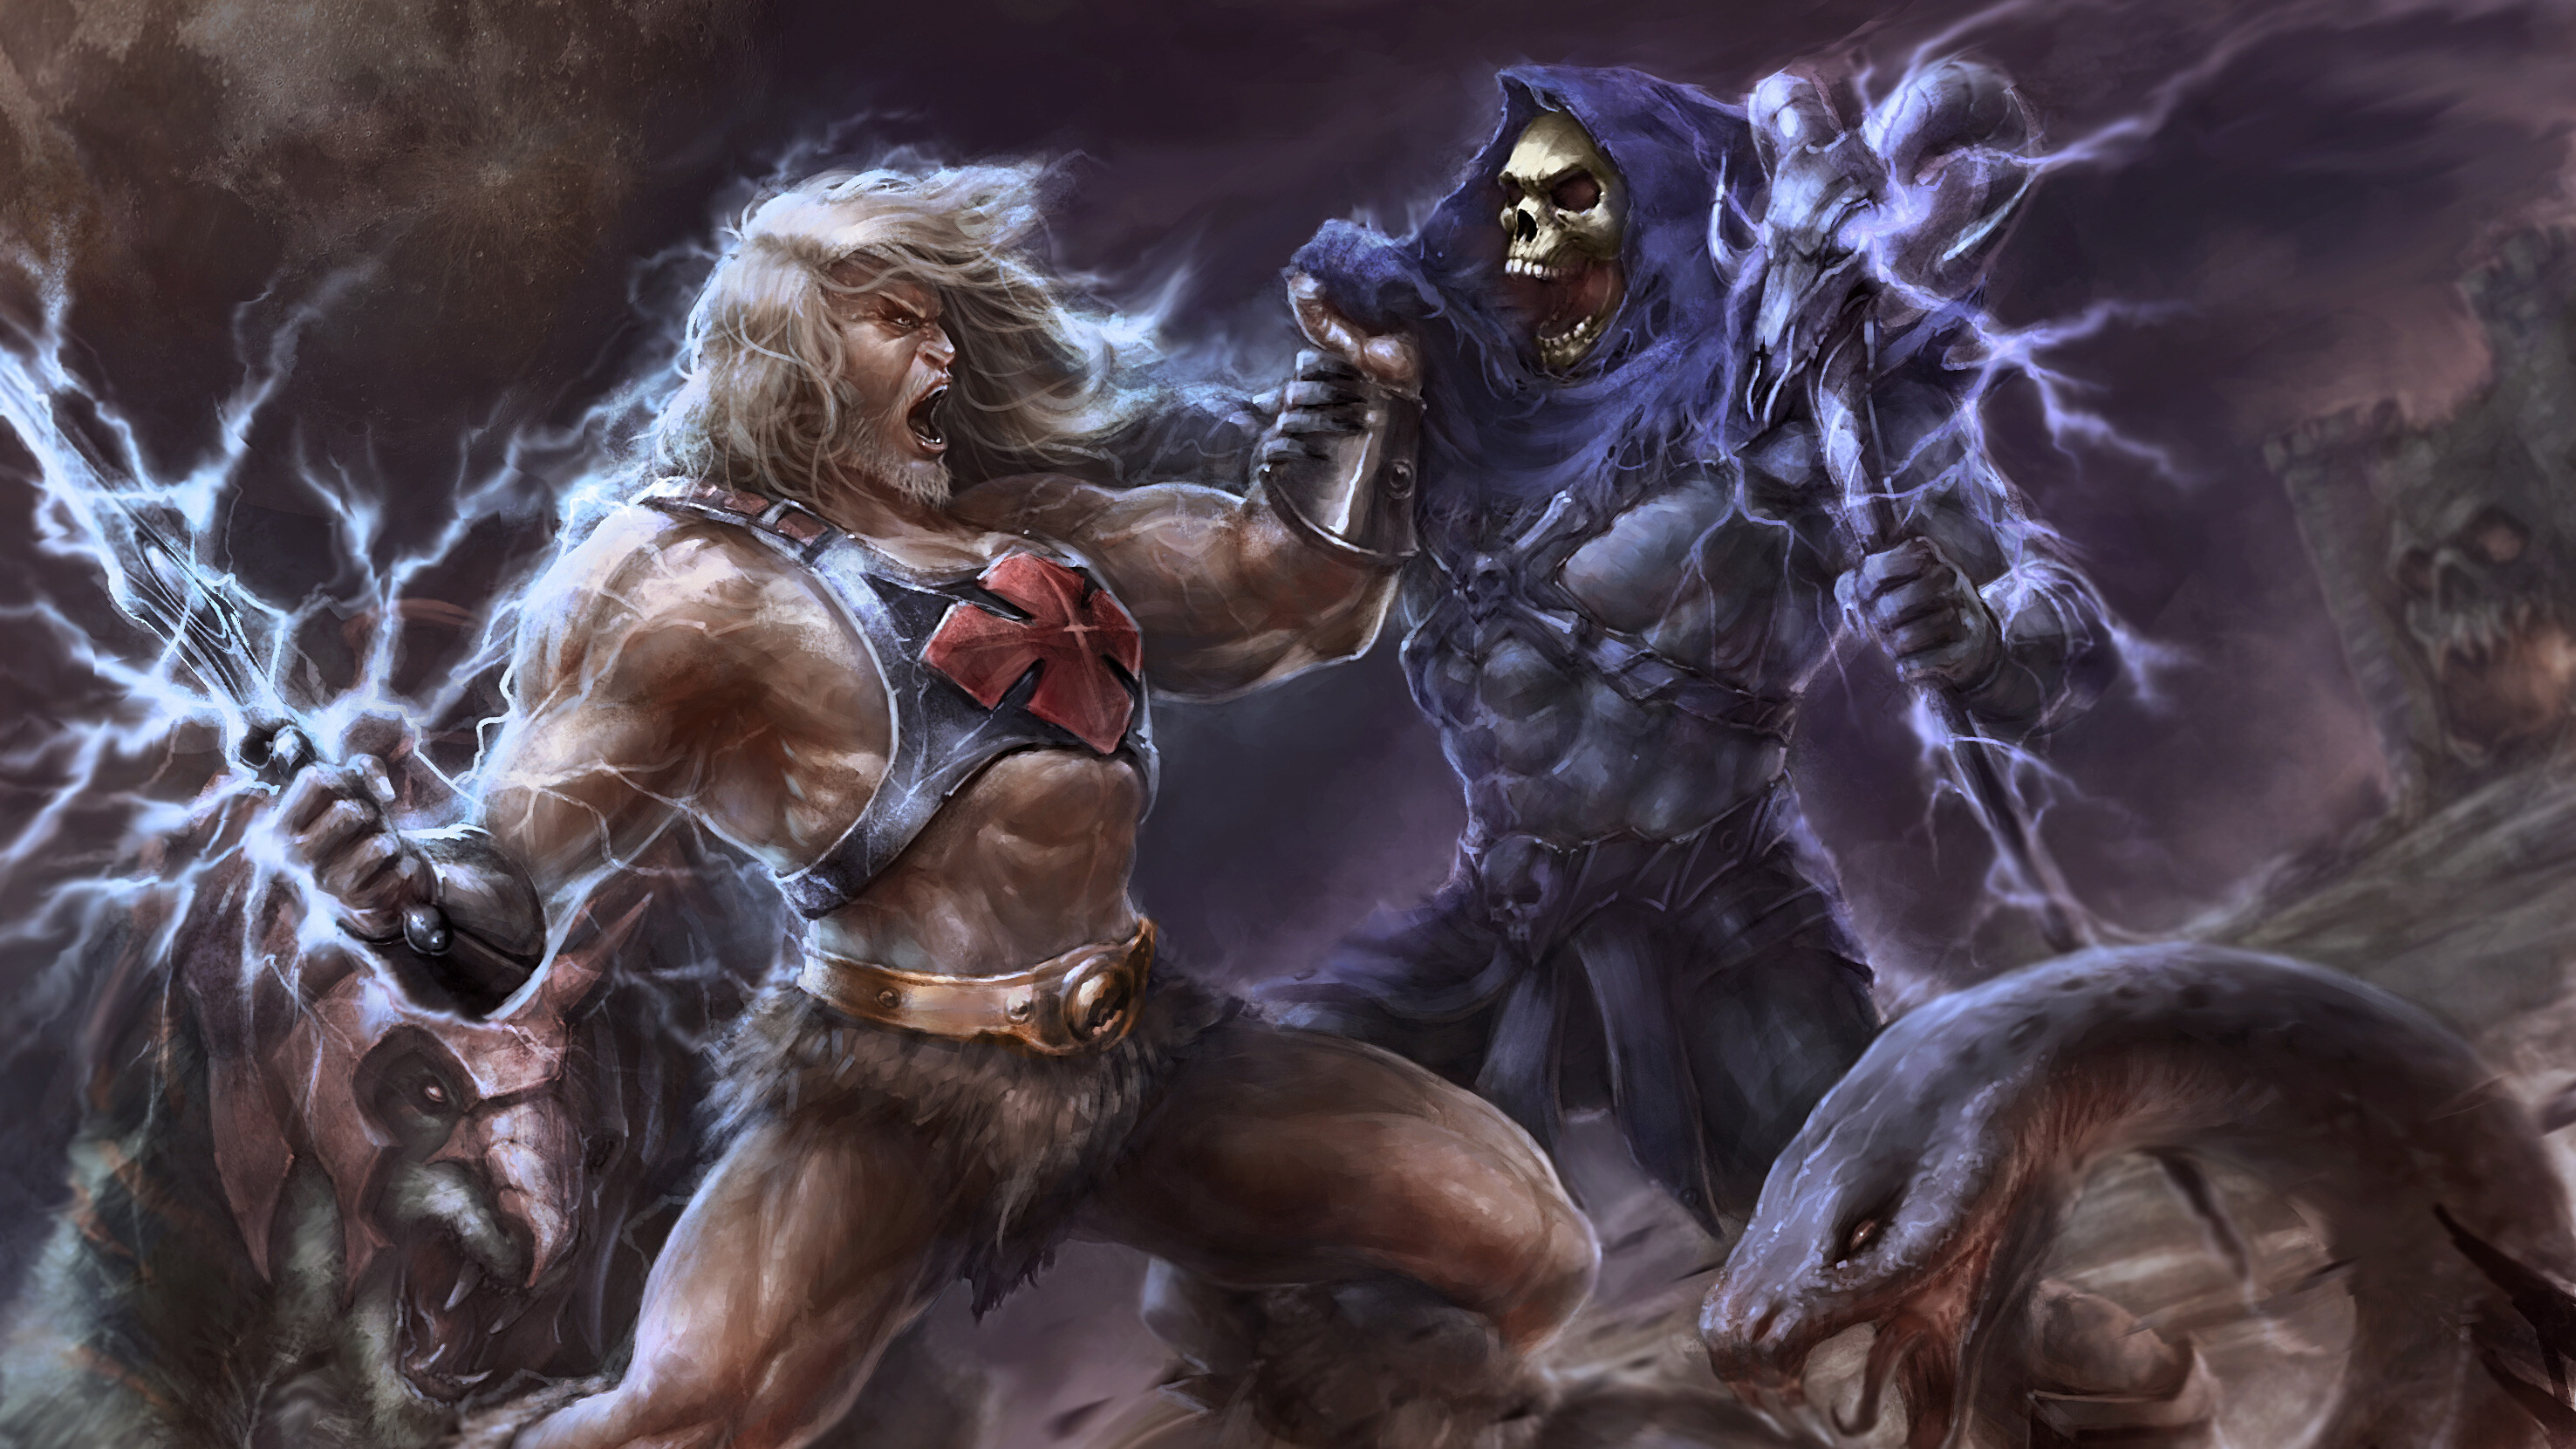 He-Man: Prince Adam vs Skeletor, The character has achieved gay icon status. 2960x1670 HD Background.